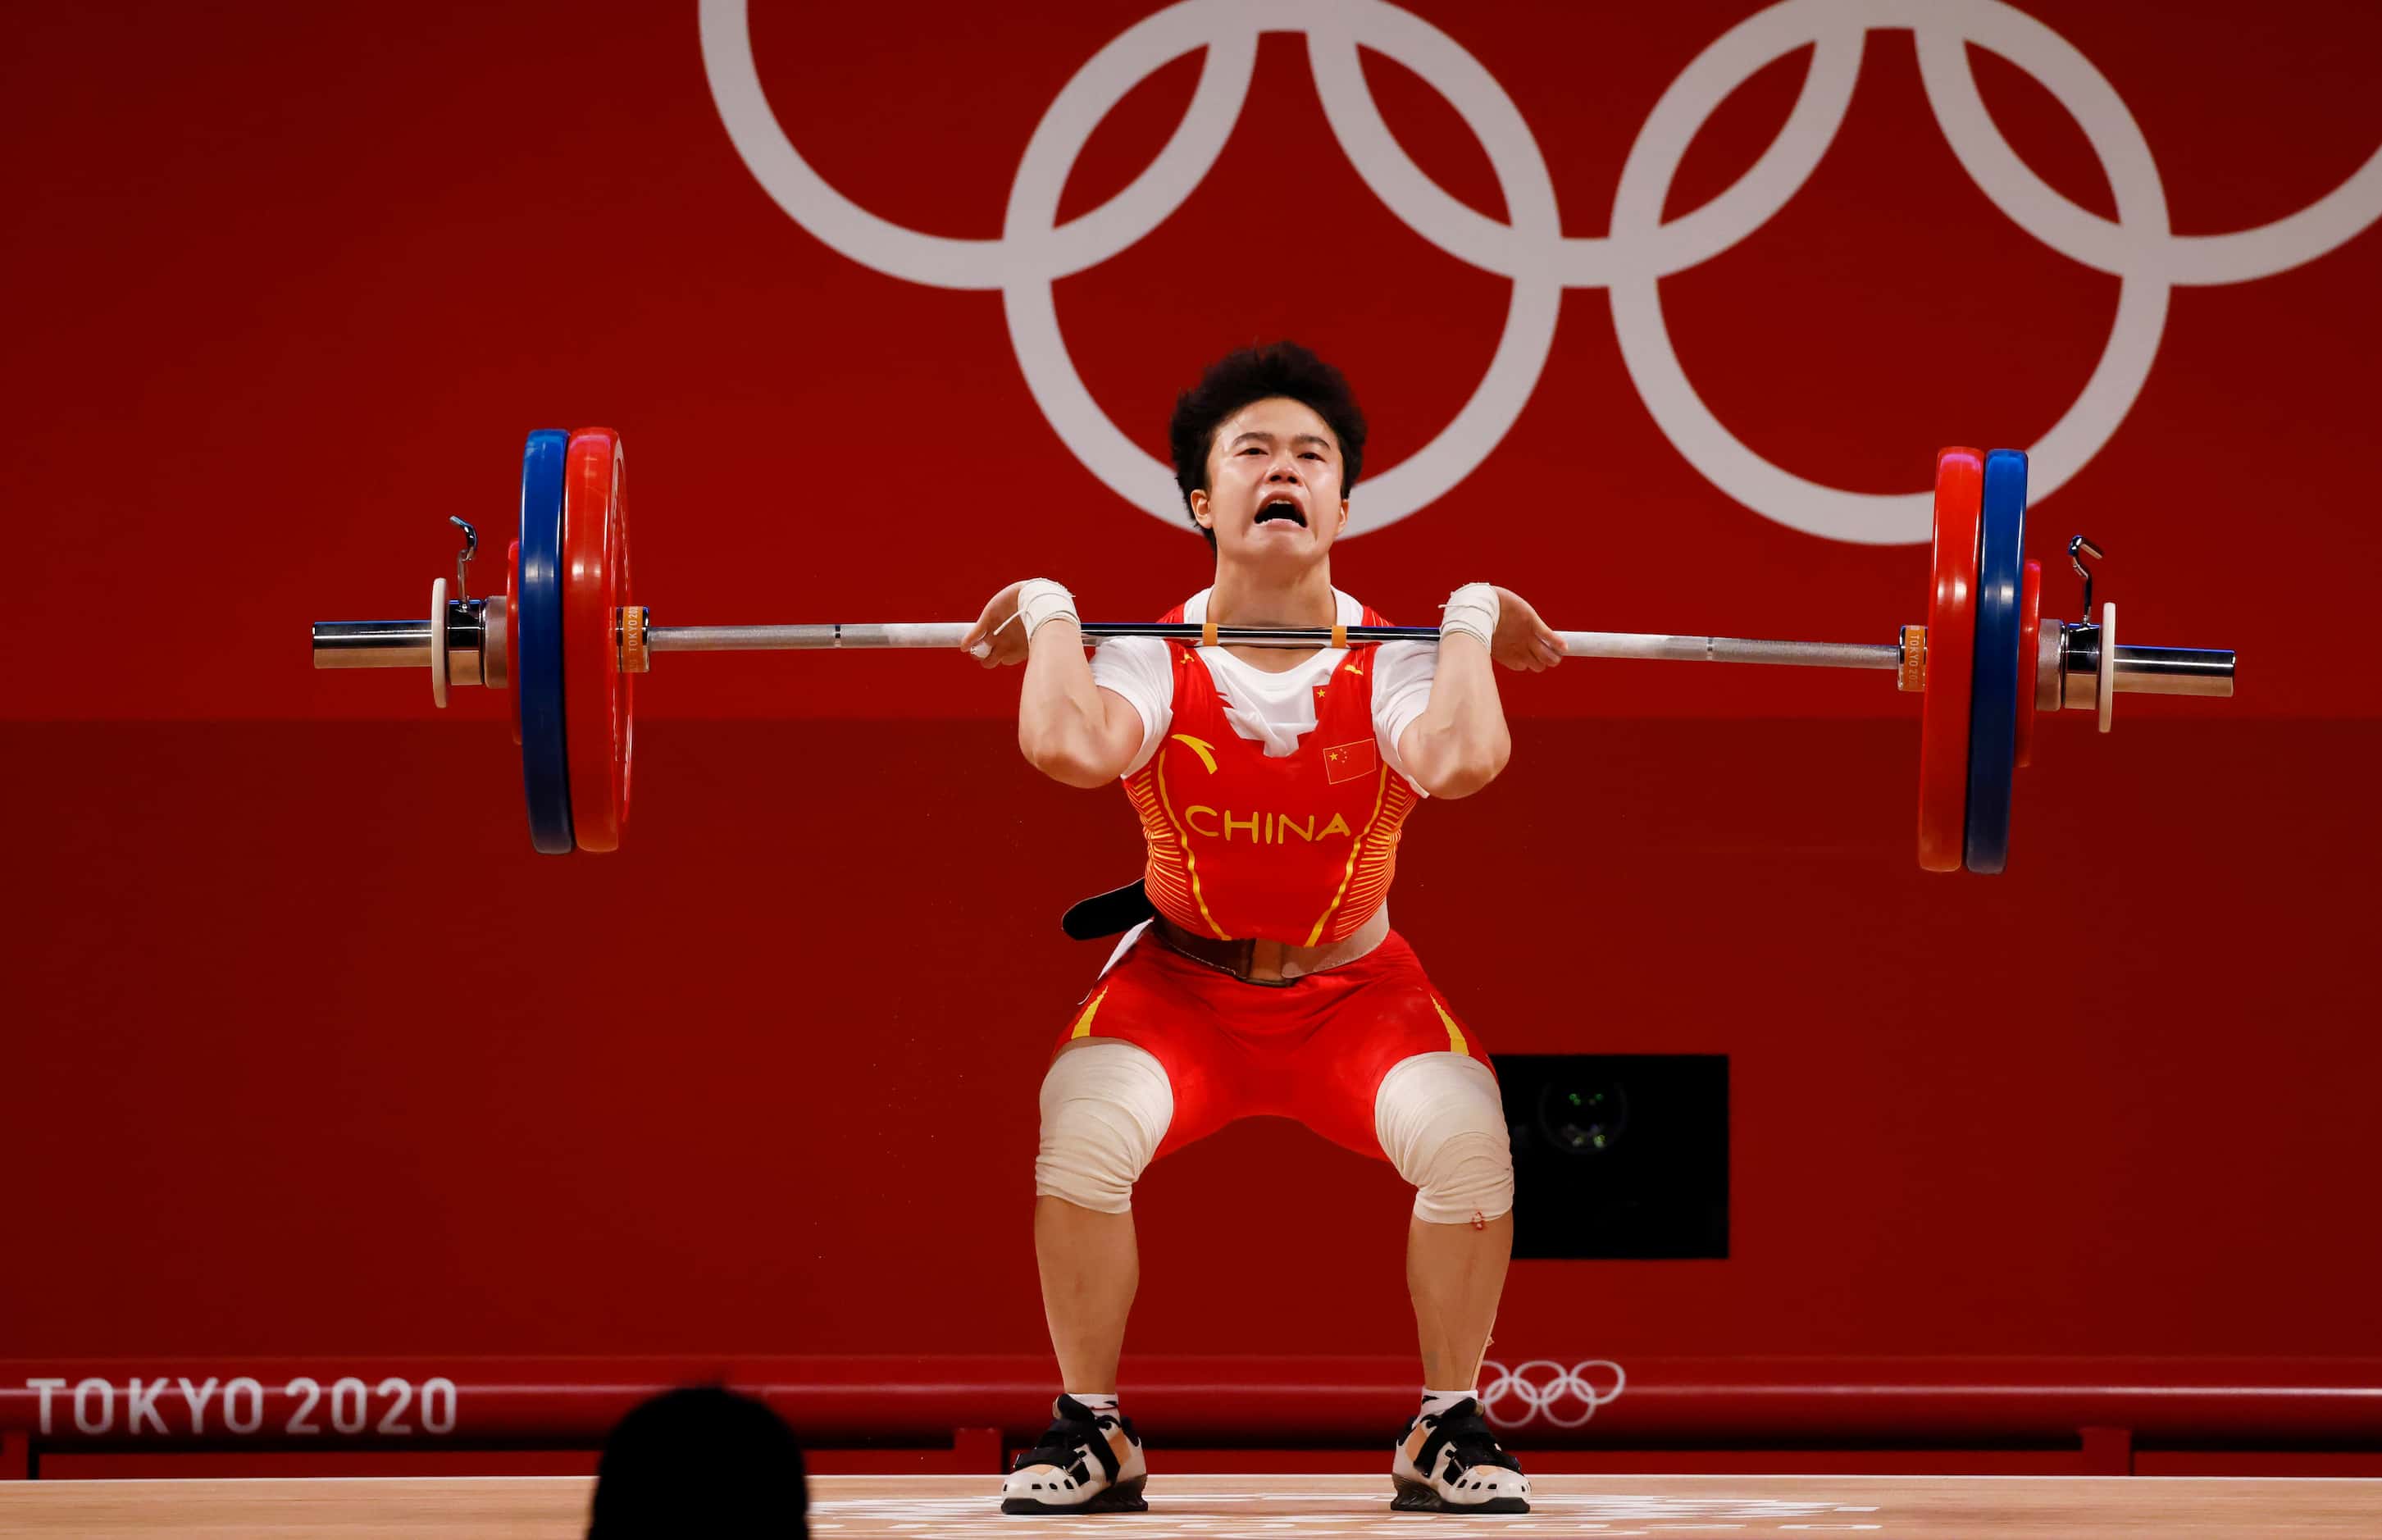 China’s Zhihui Hou lifts 116 kg an Olympic record on her third attempt in the clean and jerk...